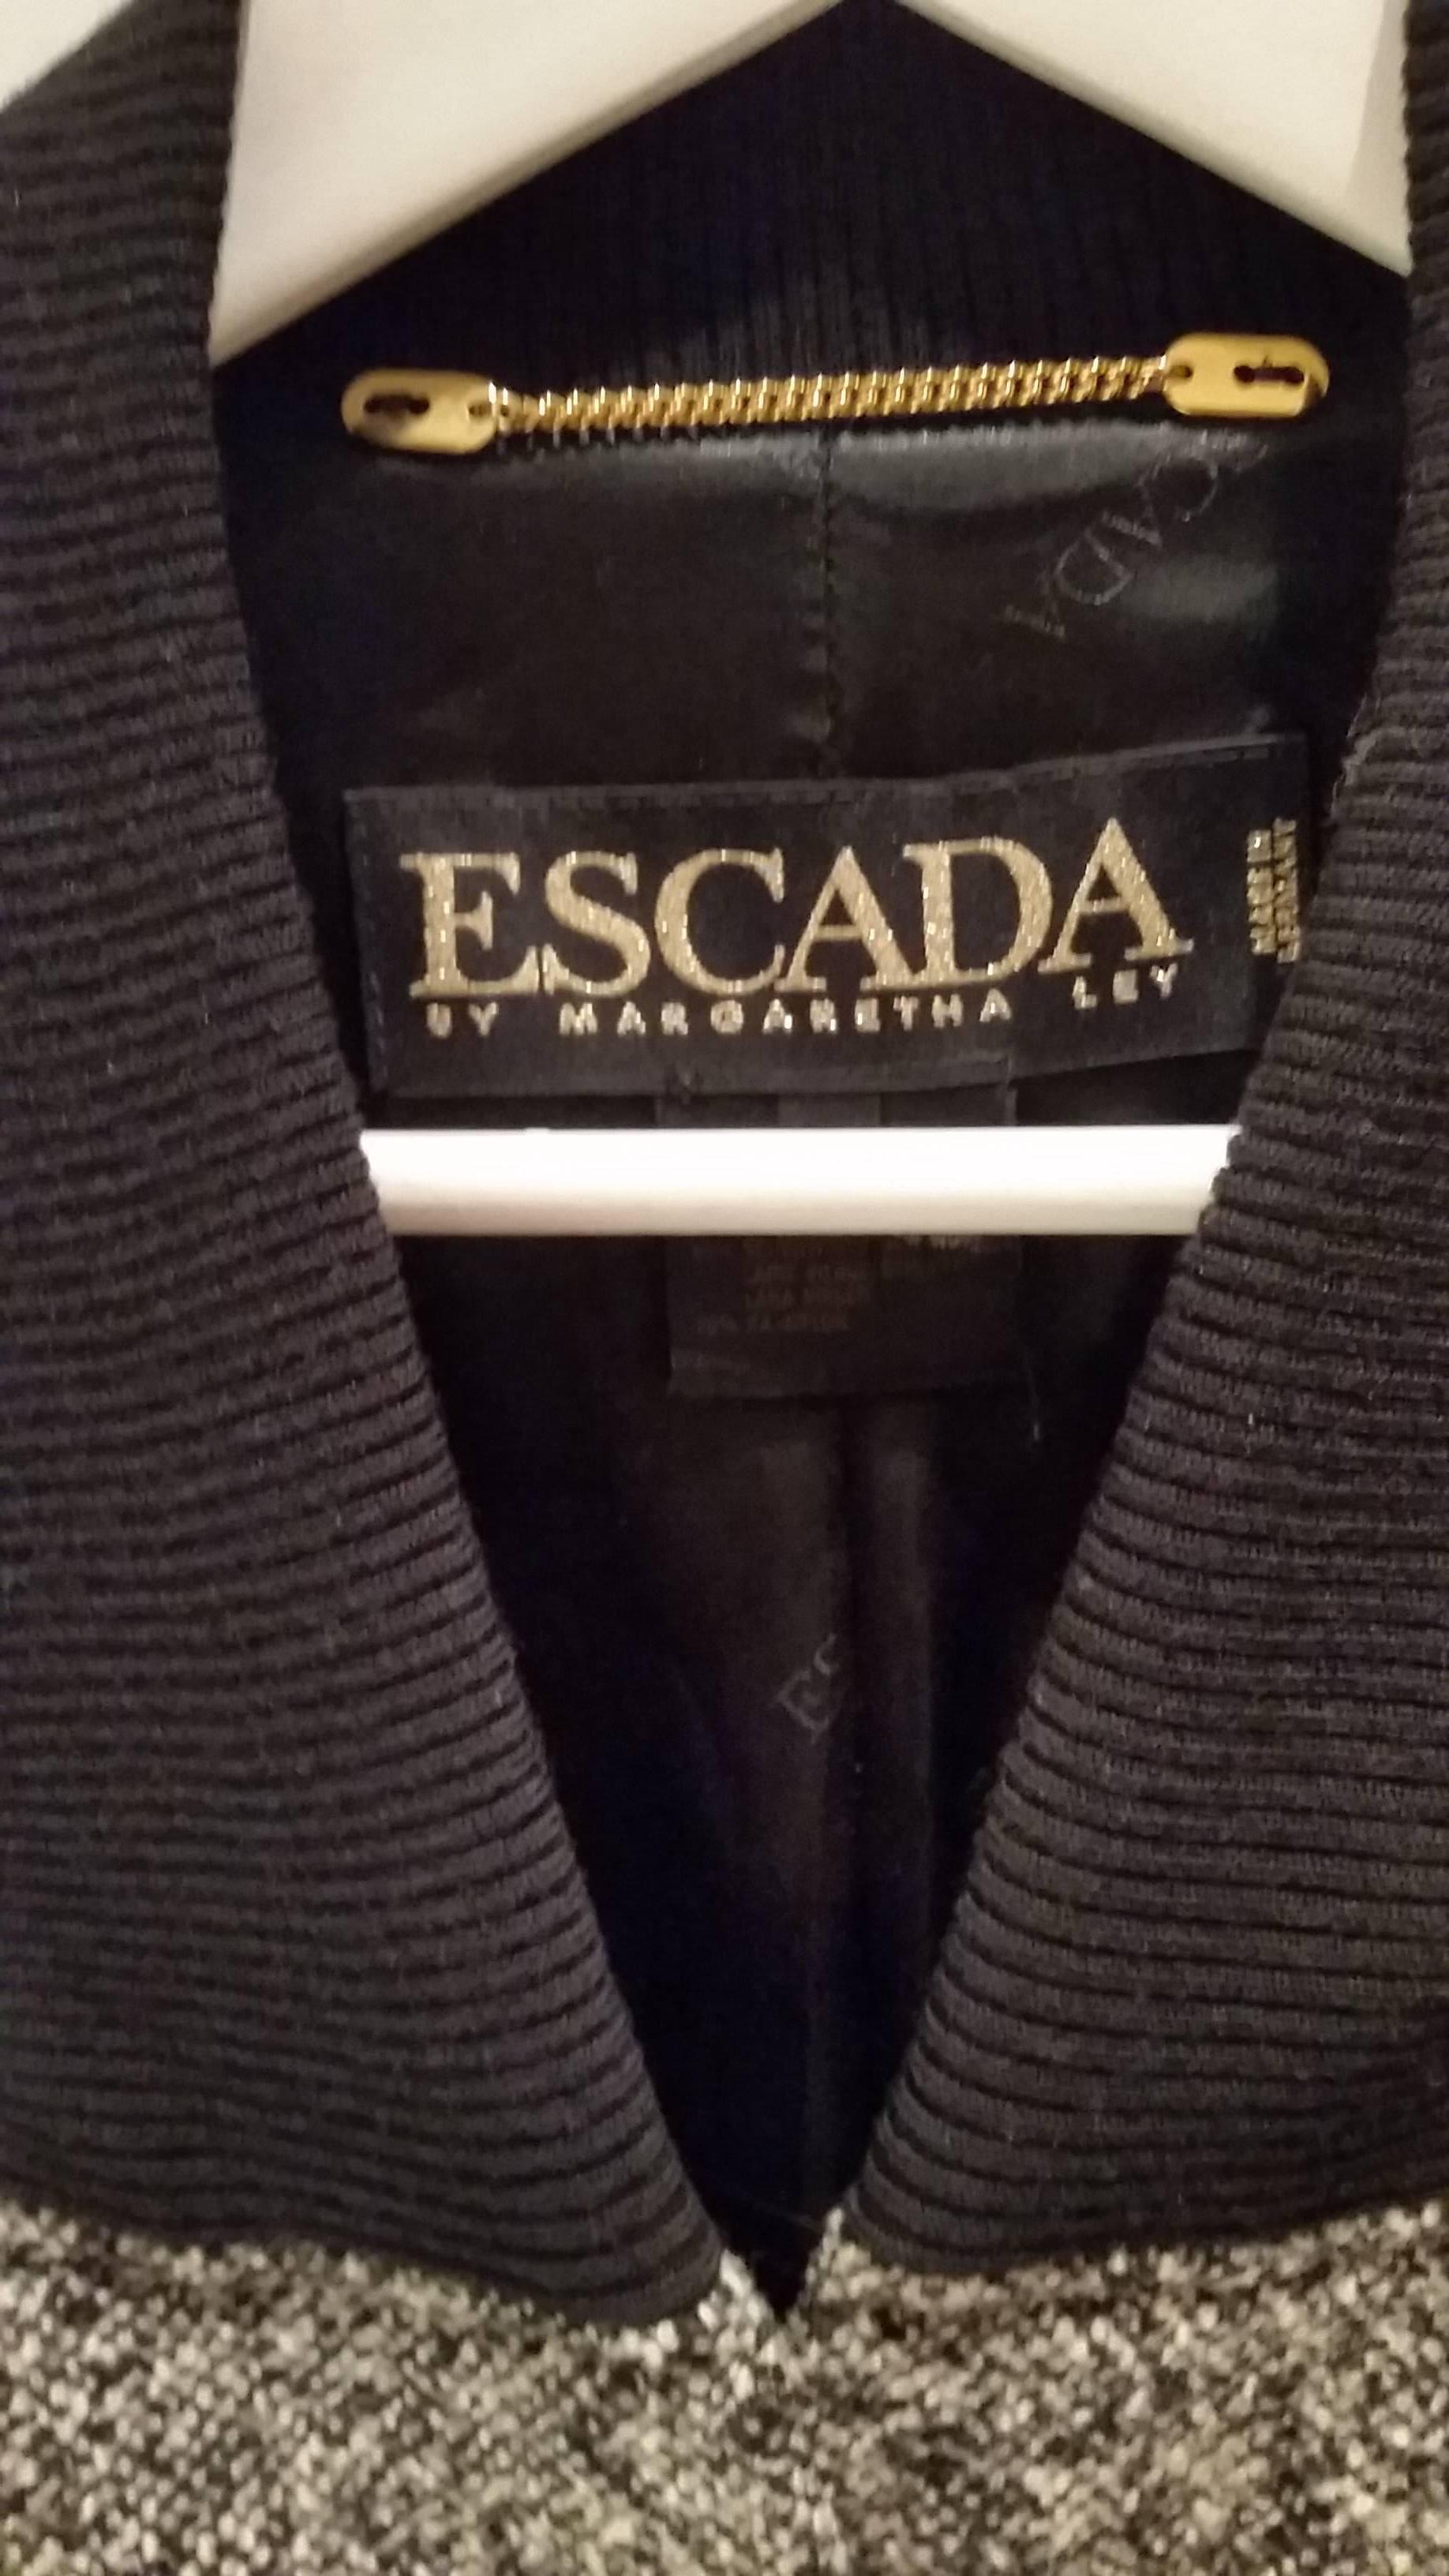 1980s Escada by Margaretha Ley grey and black jacket made in germany
in 38 european size range
composition 80 % wool 20% nylon